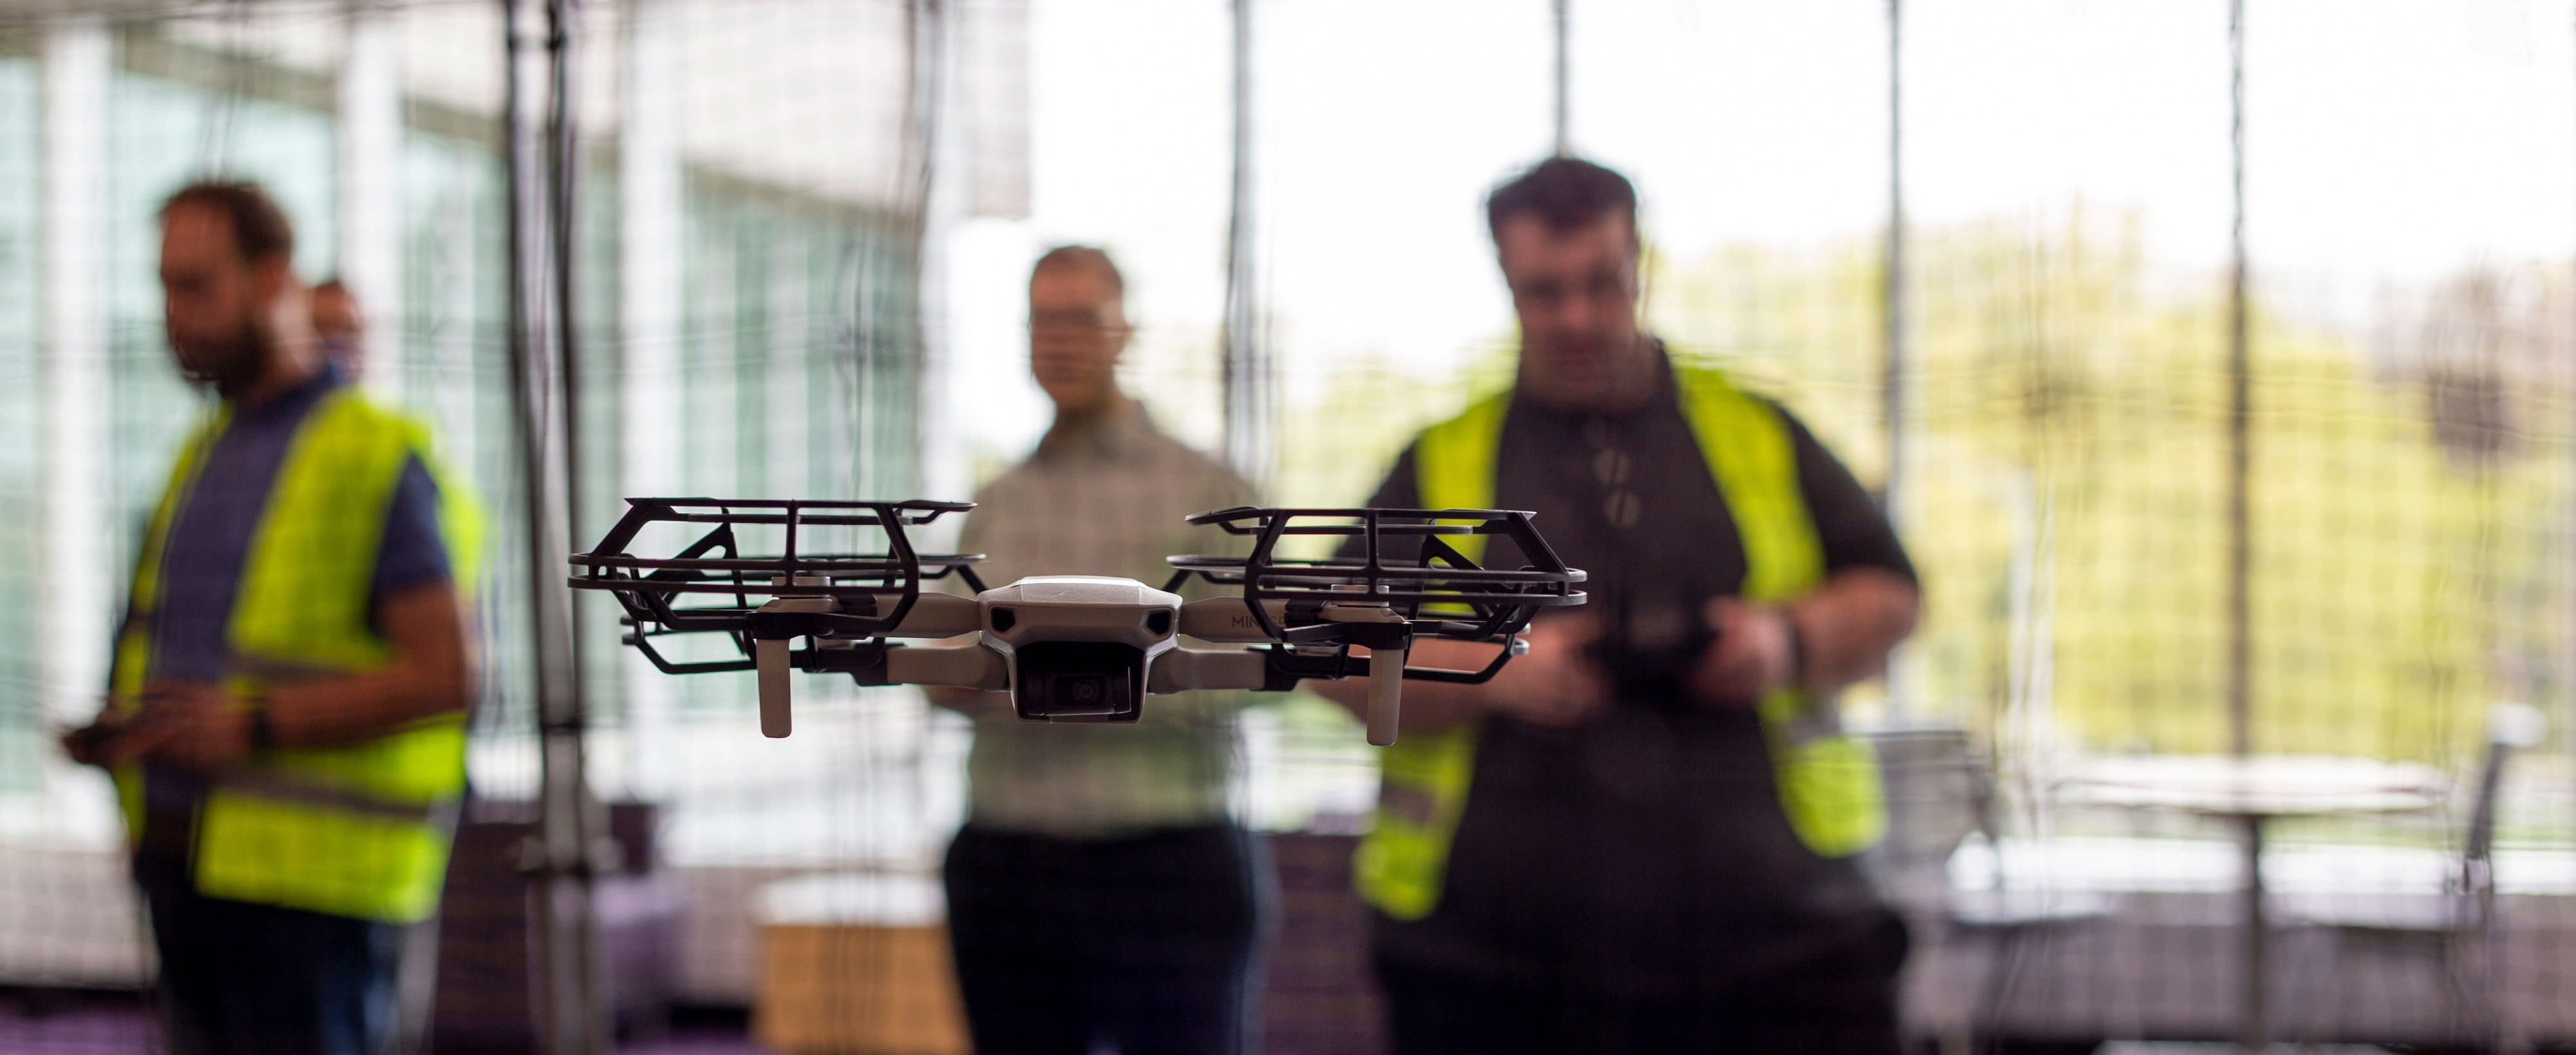 A drone hovers in the foreground while students wearing yellow vests stand behind netting and use a remote controller to guide the drone.